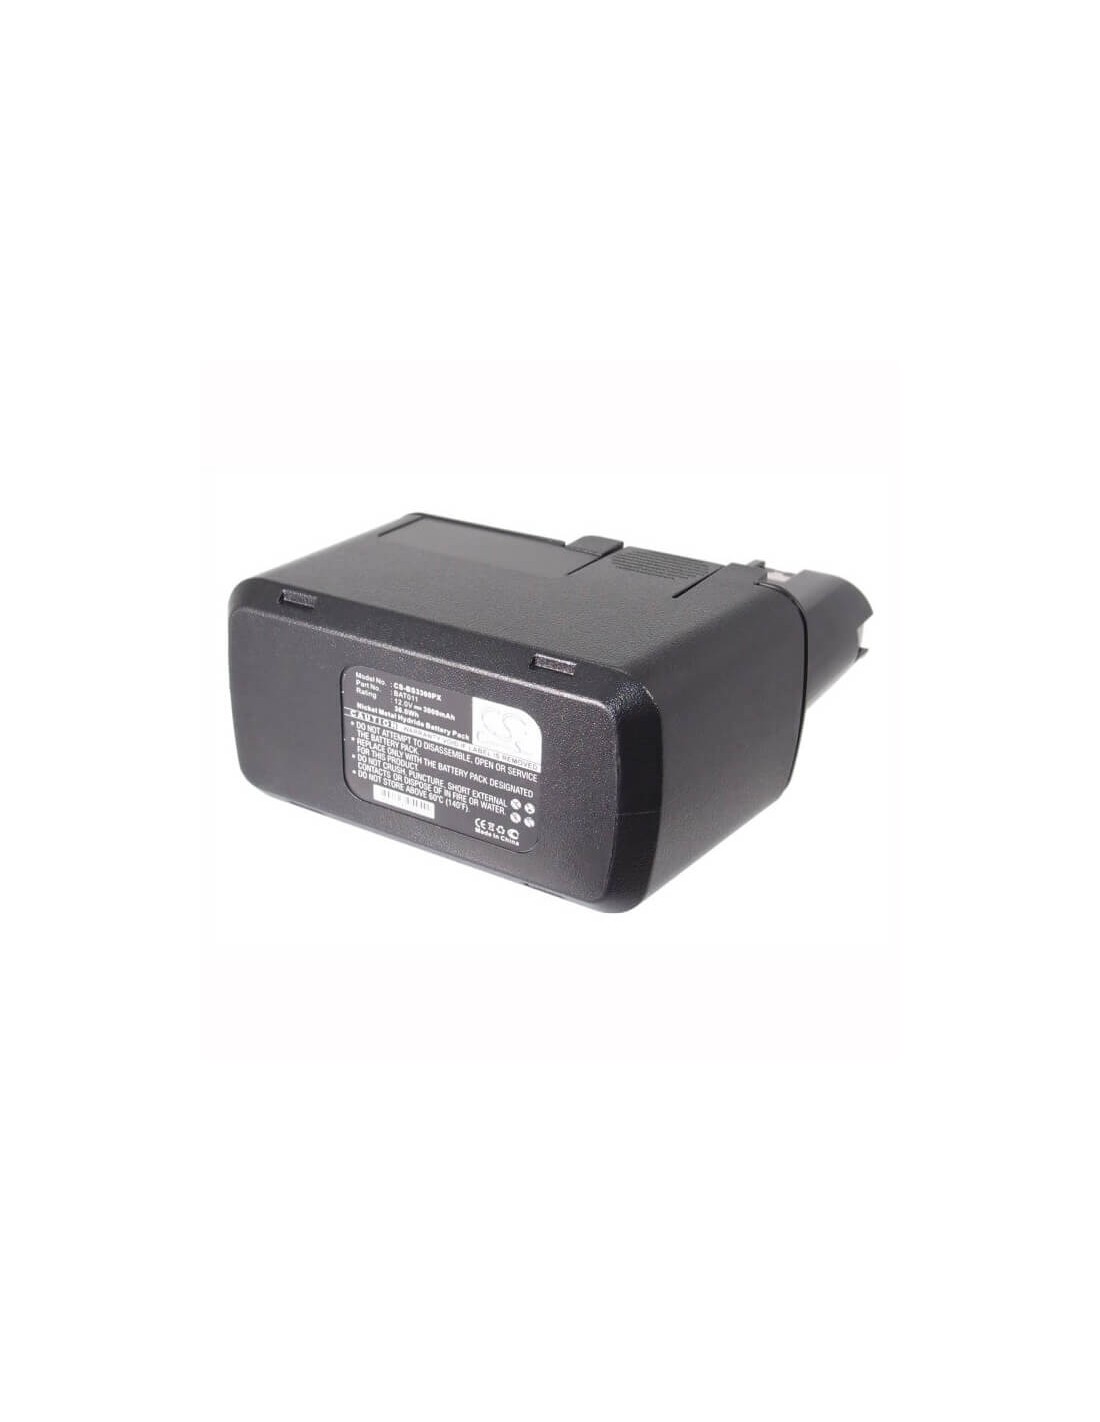 Battery for Wurth Abs 12 M2, Abs 12 M-2, Abs 12m2 12V, 3000mAh - 36.00Wh